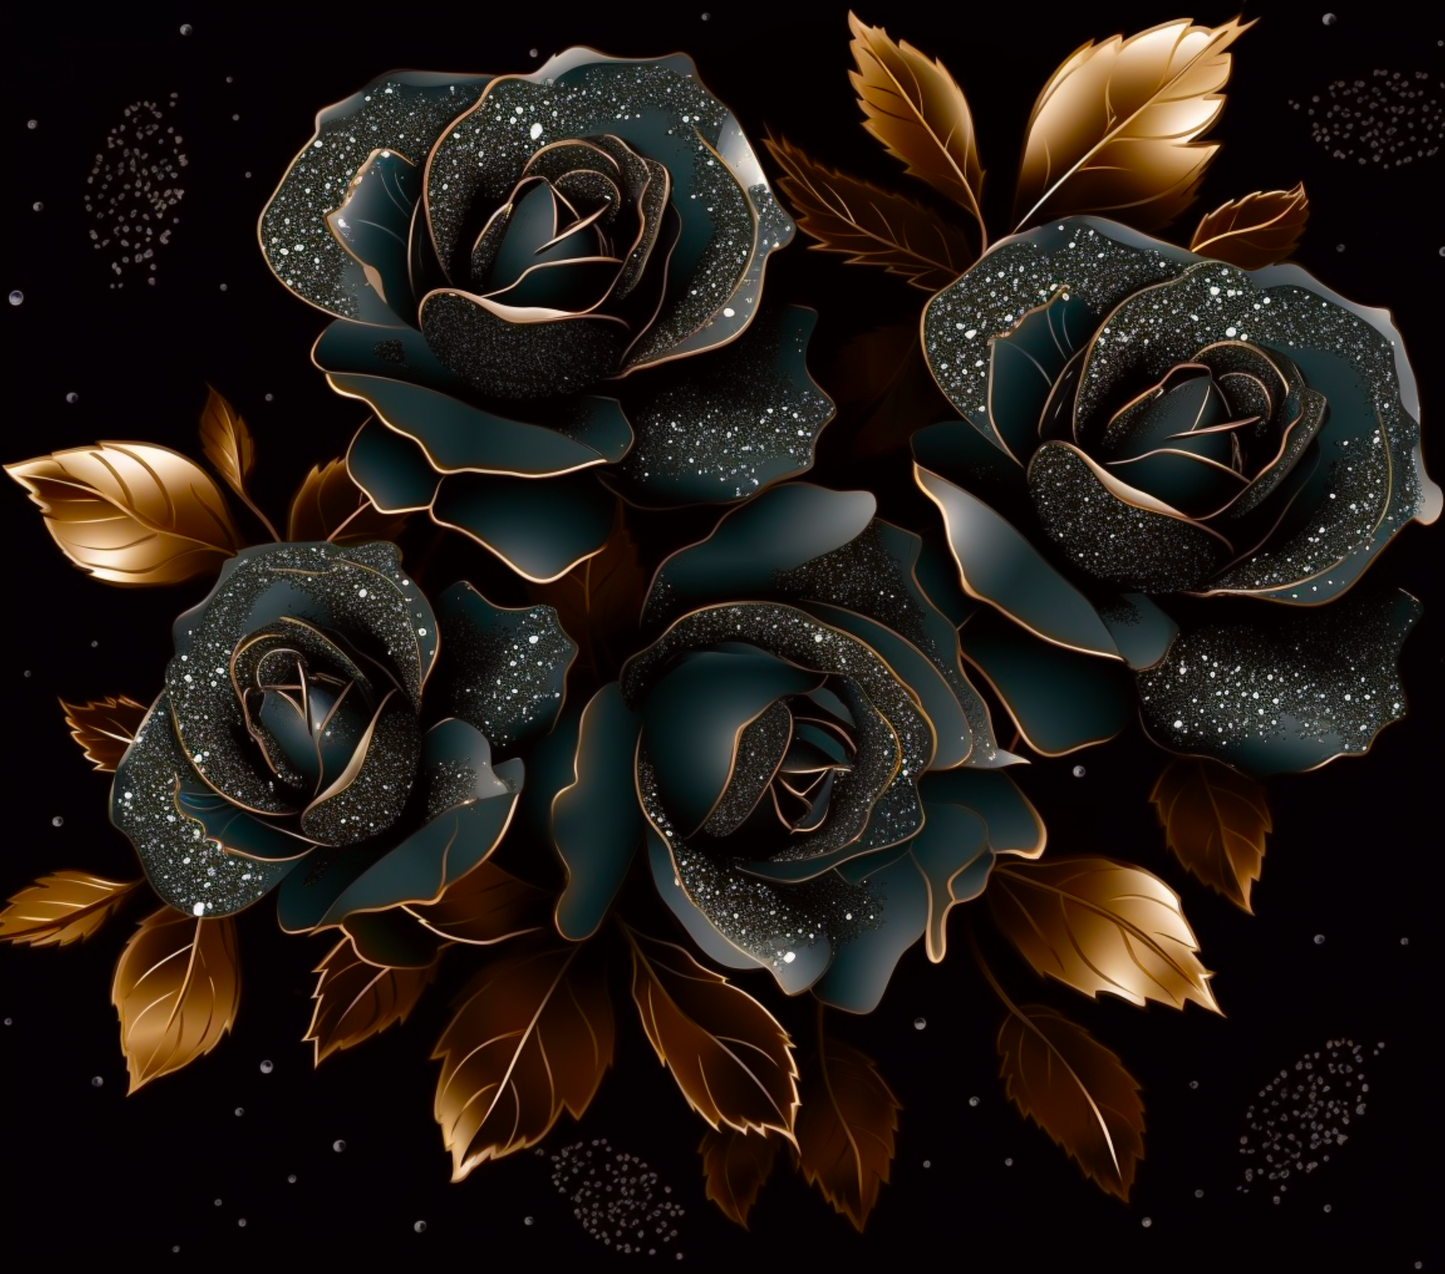 BLACK ROSES WITH GOLD LEAVES